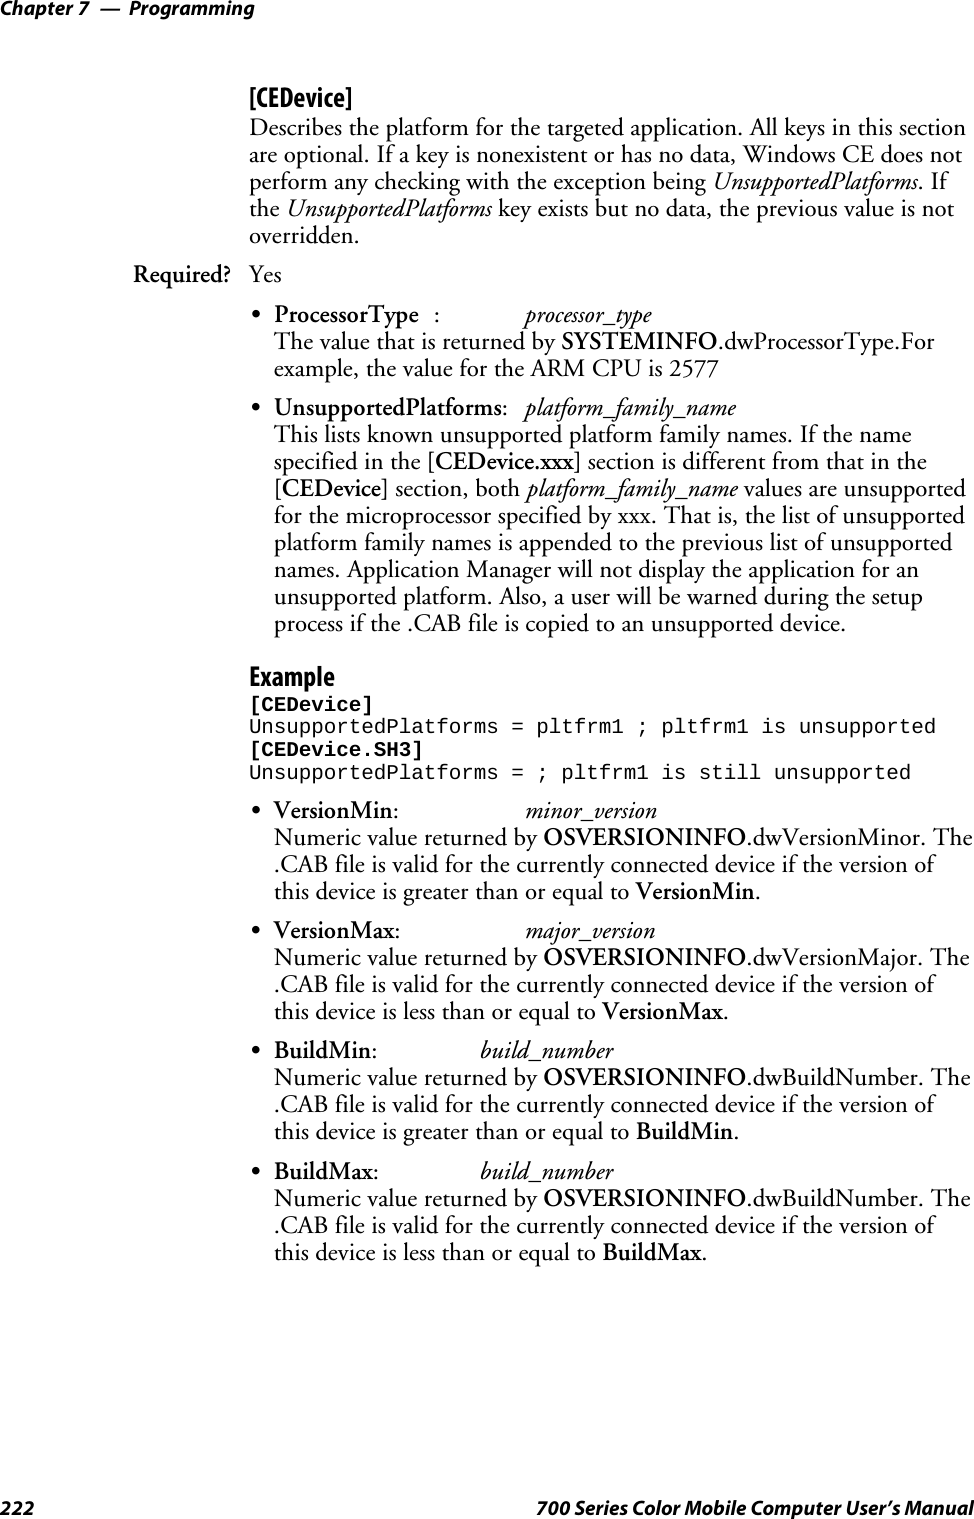 ProgrammingChapter —7222 700 Series Color Mobile Computer User’s Manual[CEDevice]Describes the platform for the targeted application. All keys in this sectionare optional. If a key is nonexistent or has no data, Windows CE does notperform any checking with the exception being UnsupportedPlatforms.Ifthe UnsupportedPlatforms key exists but no data, the previous value is notoverridden.Required? YesSProcessorType :processor_typeThe value that is returned by SYSTEMINFO.dwProcessorType.Forexample, the value for the ARM CPU is 2577SUnsupportedPlatforms:platform_family_nameThis lists known unsupported platform family names. If the namespecified in the [CEDevice.xxx] section is different from that in the[CEDevice] section, both platform_family_name values are unsupportedfor the microprocessor specified by xxx. That is, the list of unsupportedplatform family names is appended to the previous list of unsupportednames. Application Manager will not display the application for anunsupported platform. Also, a user will be warned during the setupprocess if the .CAB file is copied to an unsupported device.Example[CEDevice]UnsupportedPlatforms = pltfrm1 ; pltfrm1 is unsupported[CEDevice.SH3]UnsupportedPlatforms = ; pltfrm1 is still unsupportedSVersionMin:minor_versionNumeric value returned by OSVERSIONINFO.dwVersionMinor. The.CAB file is valid for the currently connected device if the version ofthis device is greater than or equal to VersionMin.SVersionMax:major_versionNumeric value returned by OSVERSIONINFO.dwVersionMajor. The.CAB file is valid for the currently connected device if the version ofthis device is less than or equal to VersionMax.SBuildMin:build_numberNumeric value returned by OSVERSIONINFO.dwBuildNumber. The.CAB file is valid for the currently connected device if the version ofthis device is greater than or equal to BuildMin.SBuildMax:build_numberNumeric value returned by OSVERSIONINFO.dwBuildNumber. The.CAB file is valid for the currently connected device if the version ofthis device is less than or equal to BuildMax.